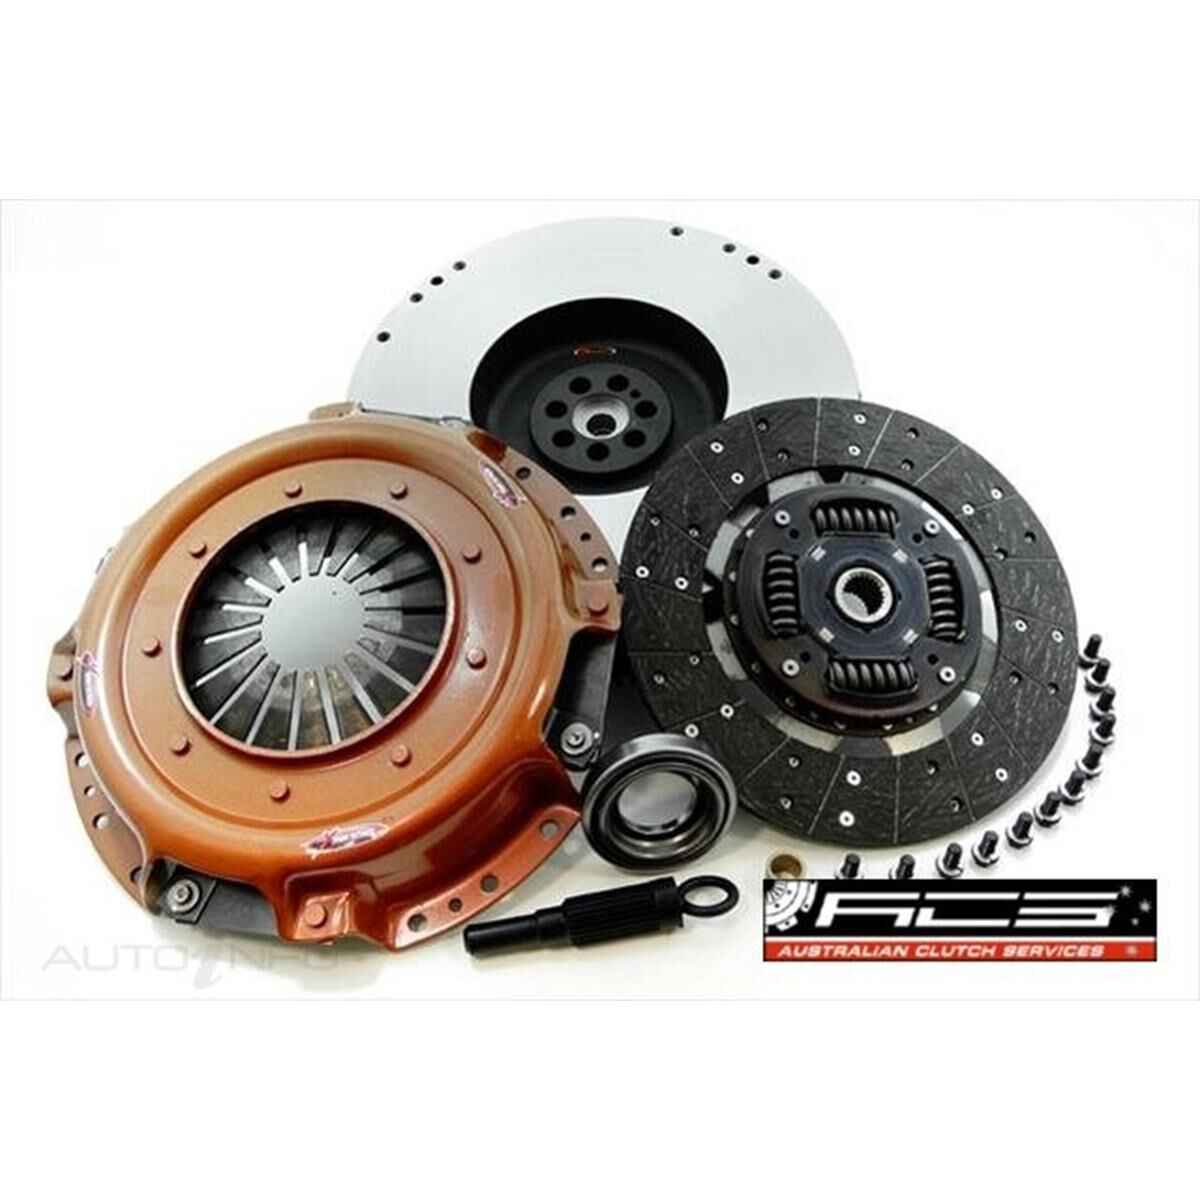 Xtreme Outback Sprung Organic Clutch Kit - Includes SMF, KNI28509